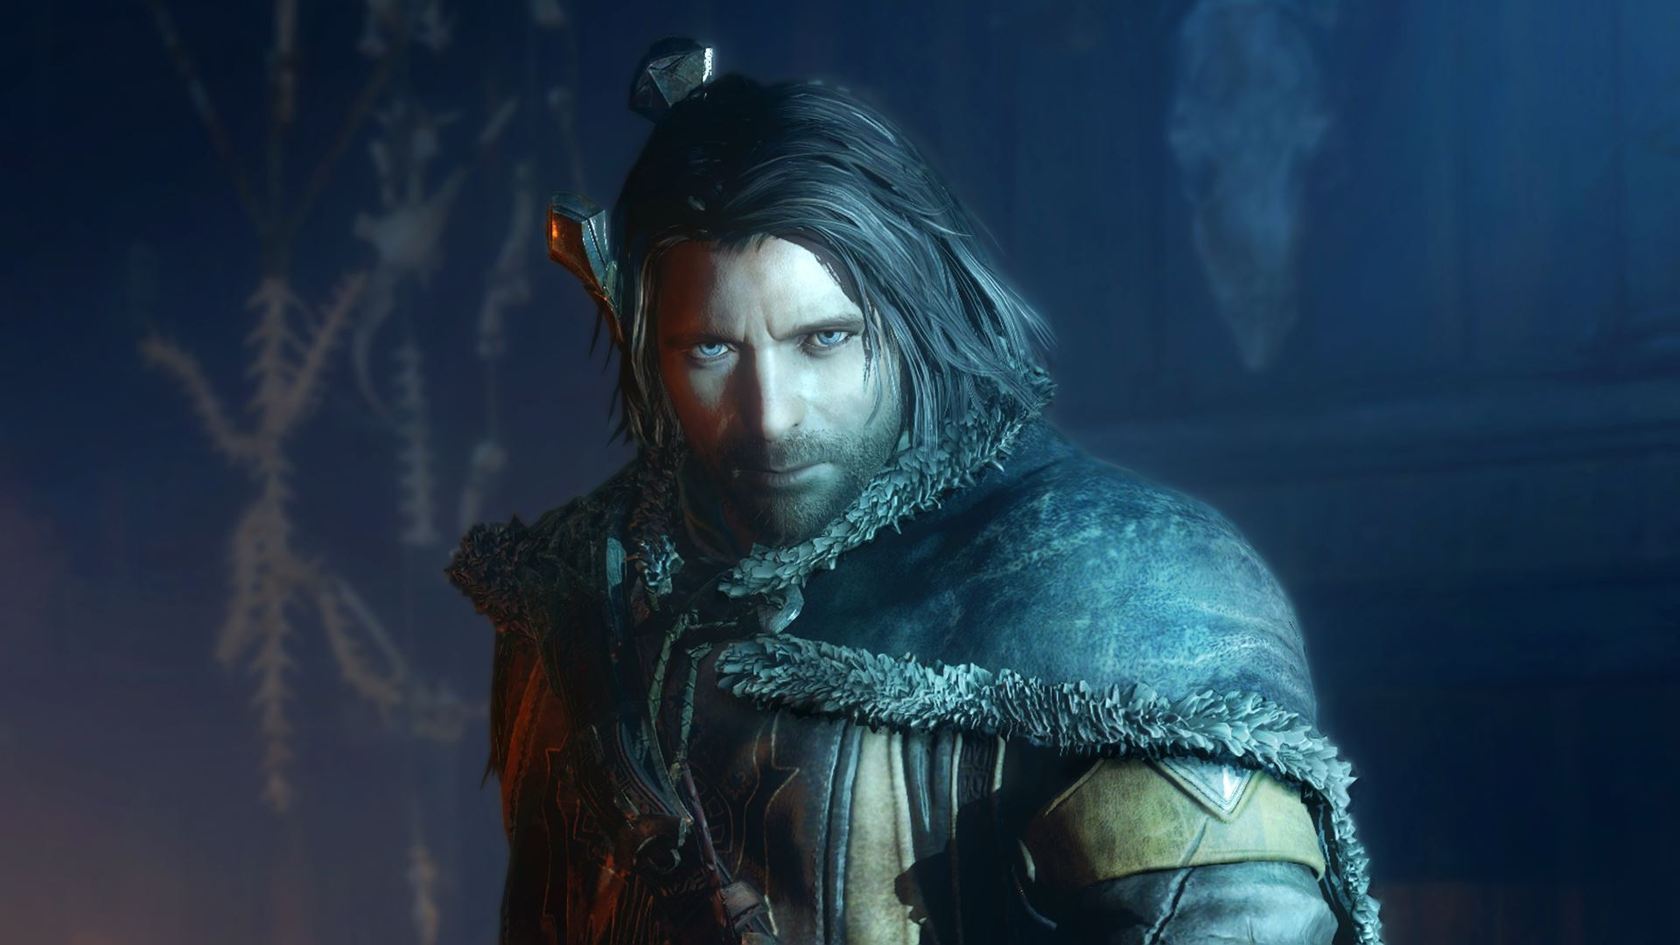 Middle-earth™: Shadow of Mordor™ - manual